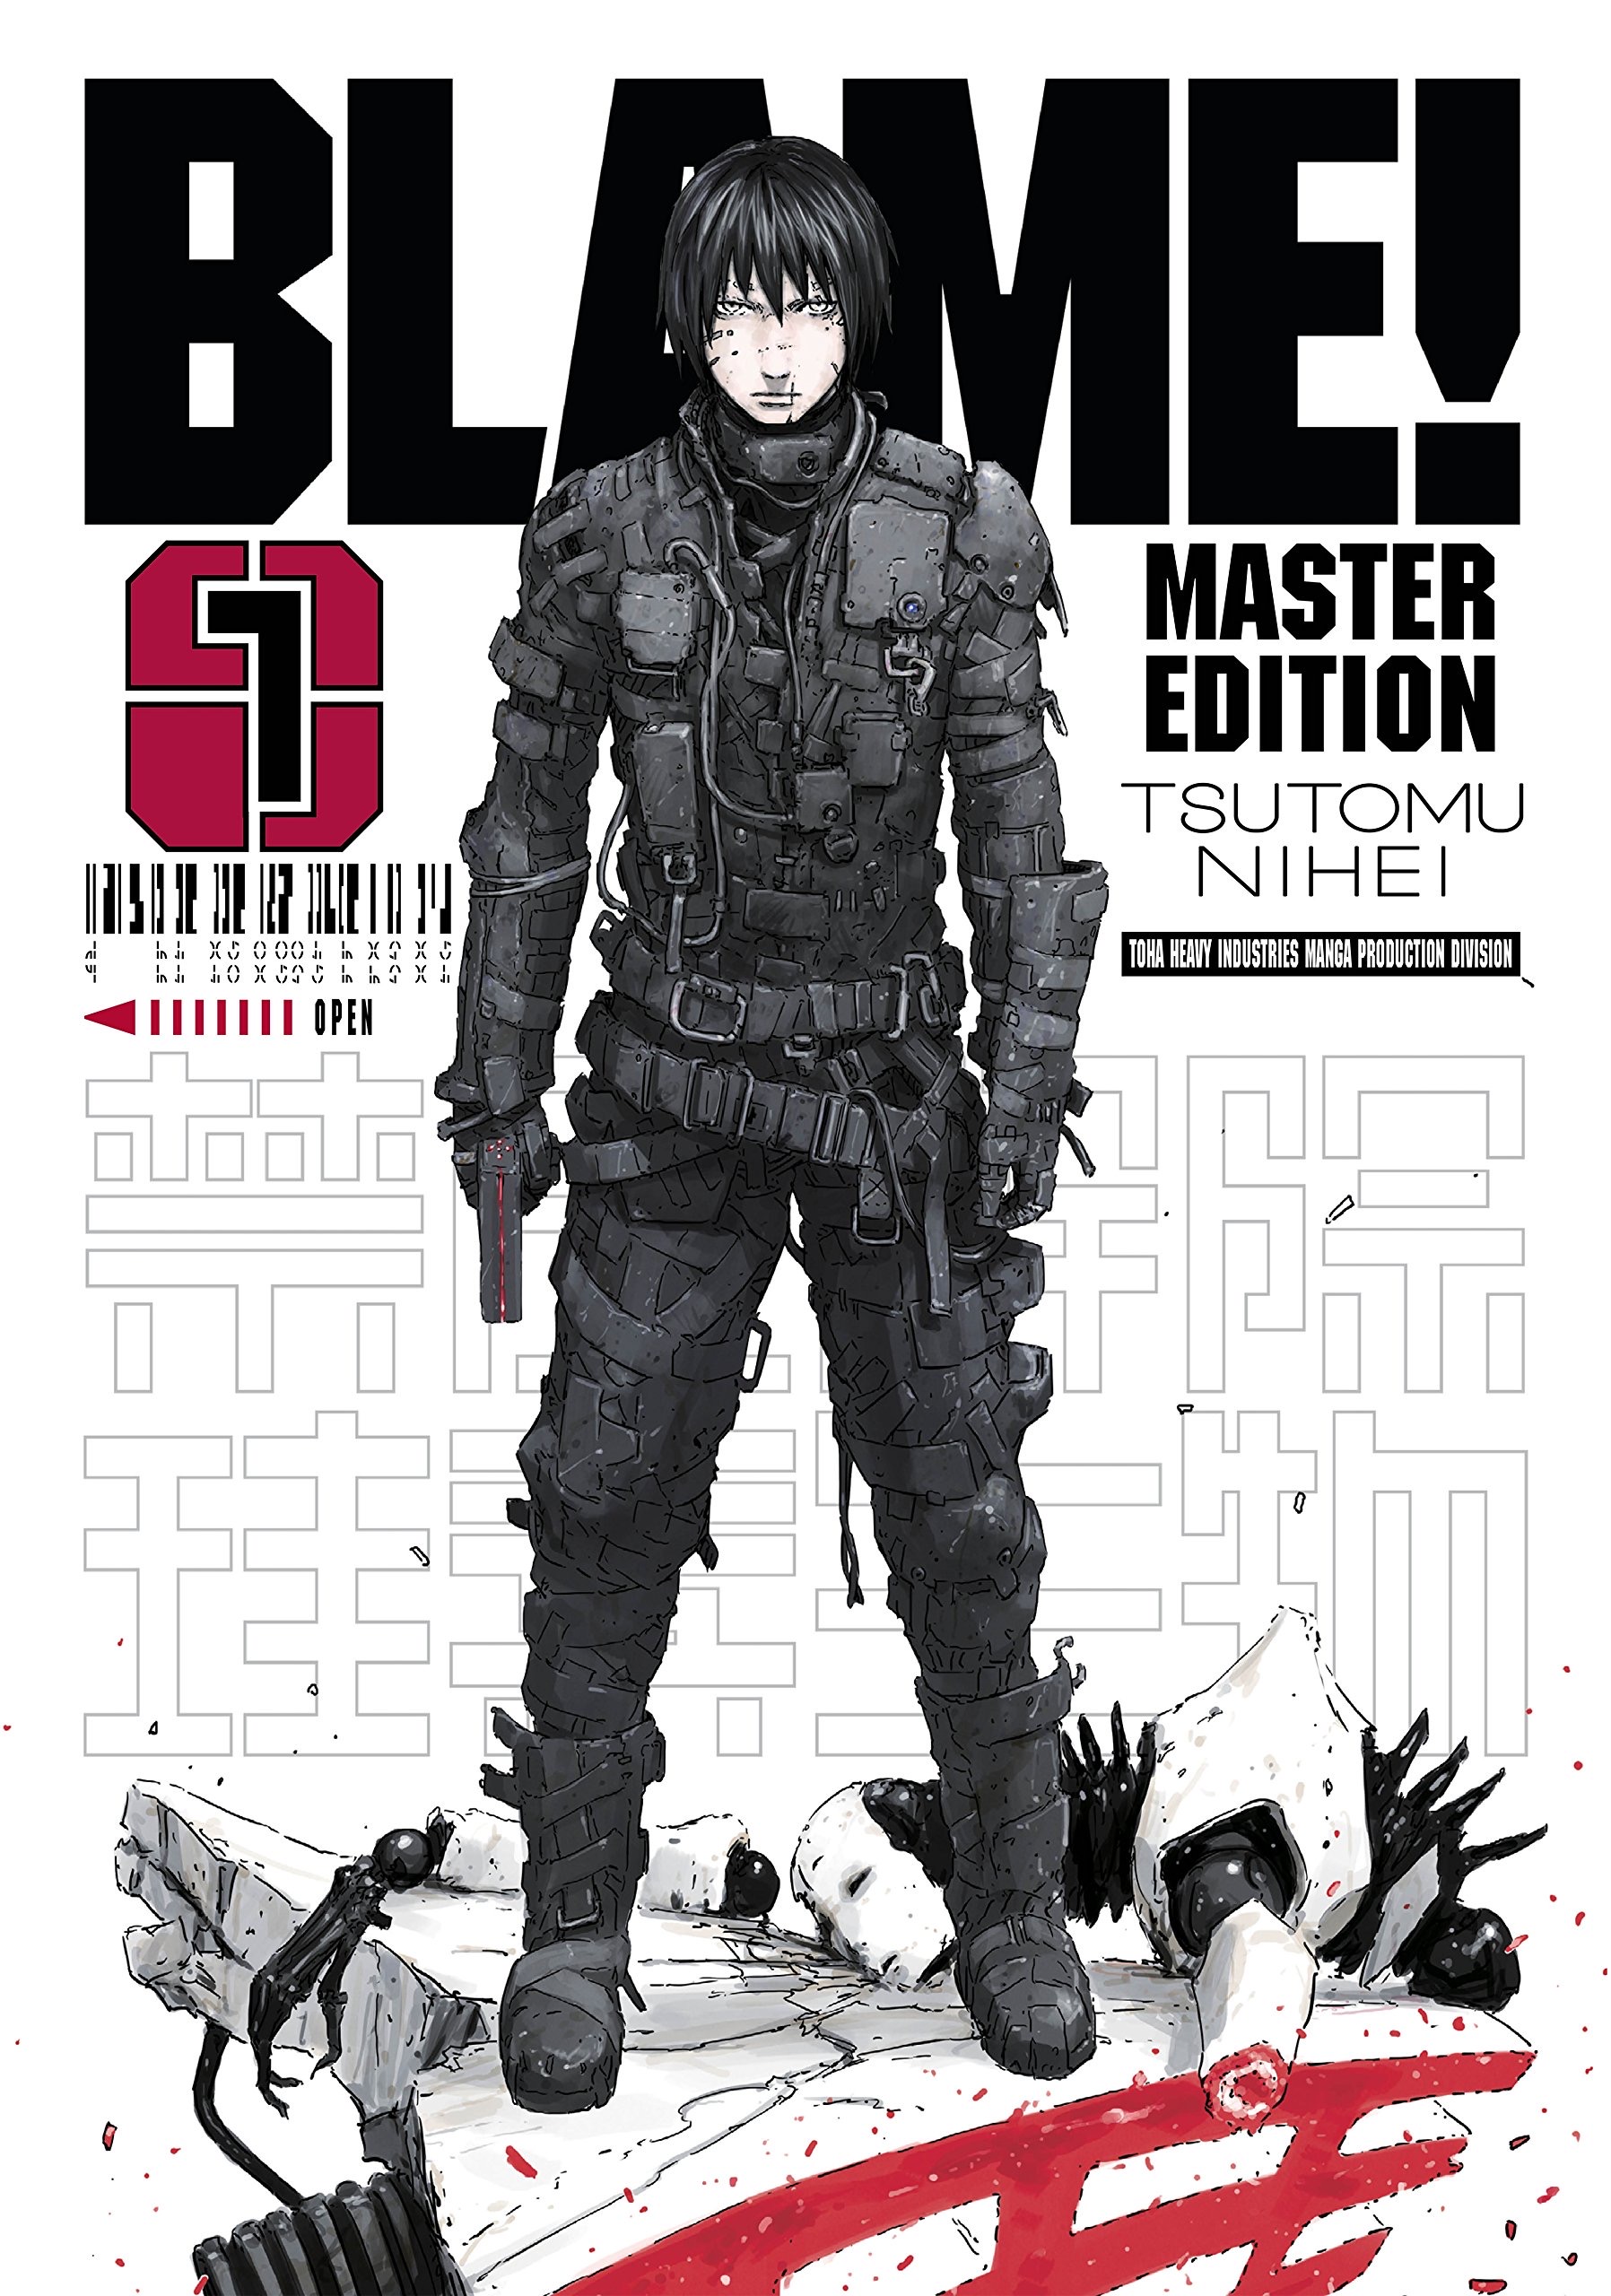 hes such a sccunkly guyyy <3 <br><br> [image id: the cover of the first blame! master edition book. it shows kyrii standing on a slab of rubble with a destroyed safeguard at his feet. he is holding his gravitron beam emitter in one hand, and is staring directly at the viewer. /end id]